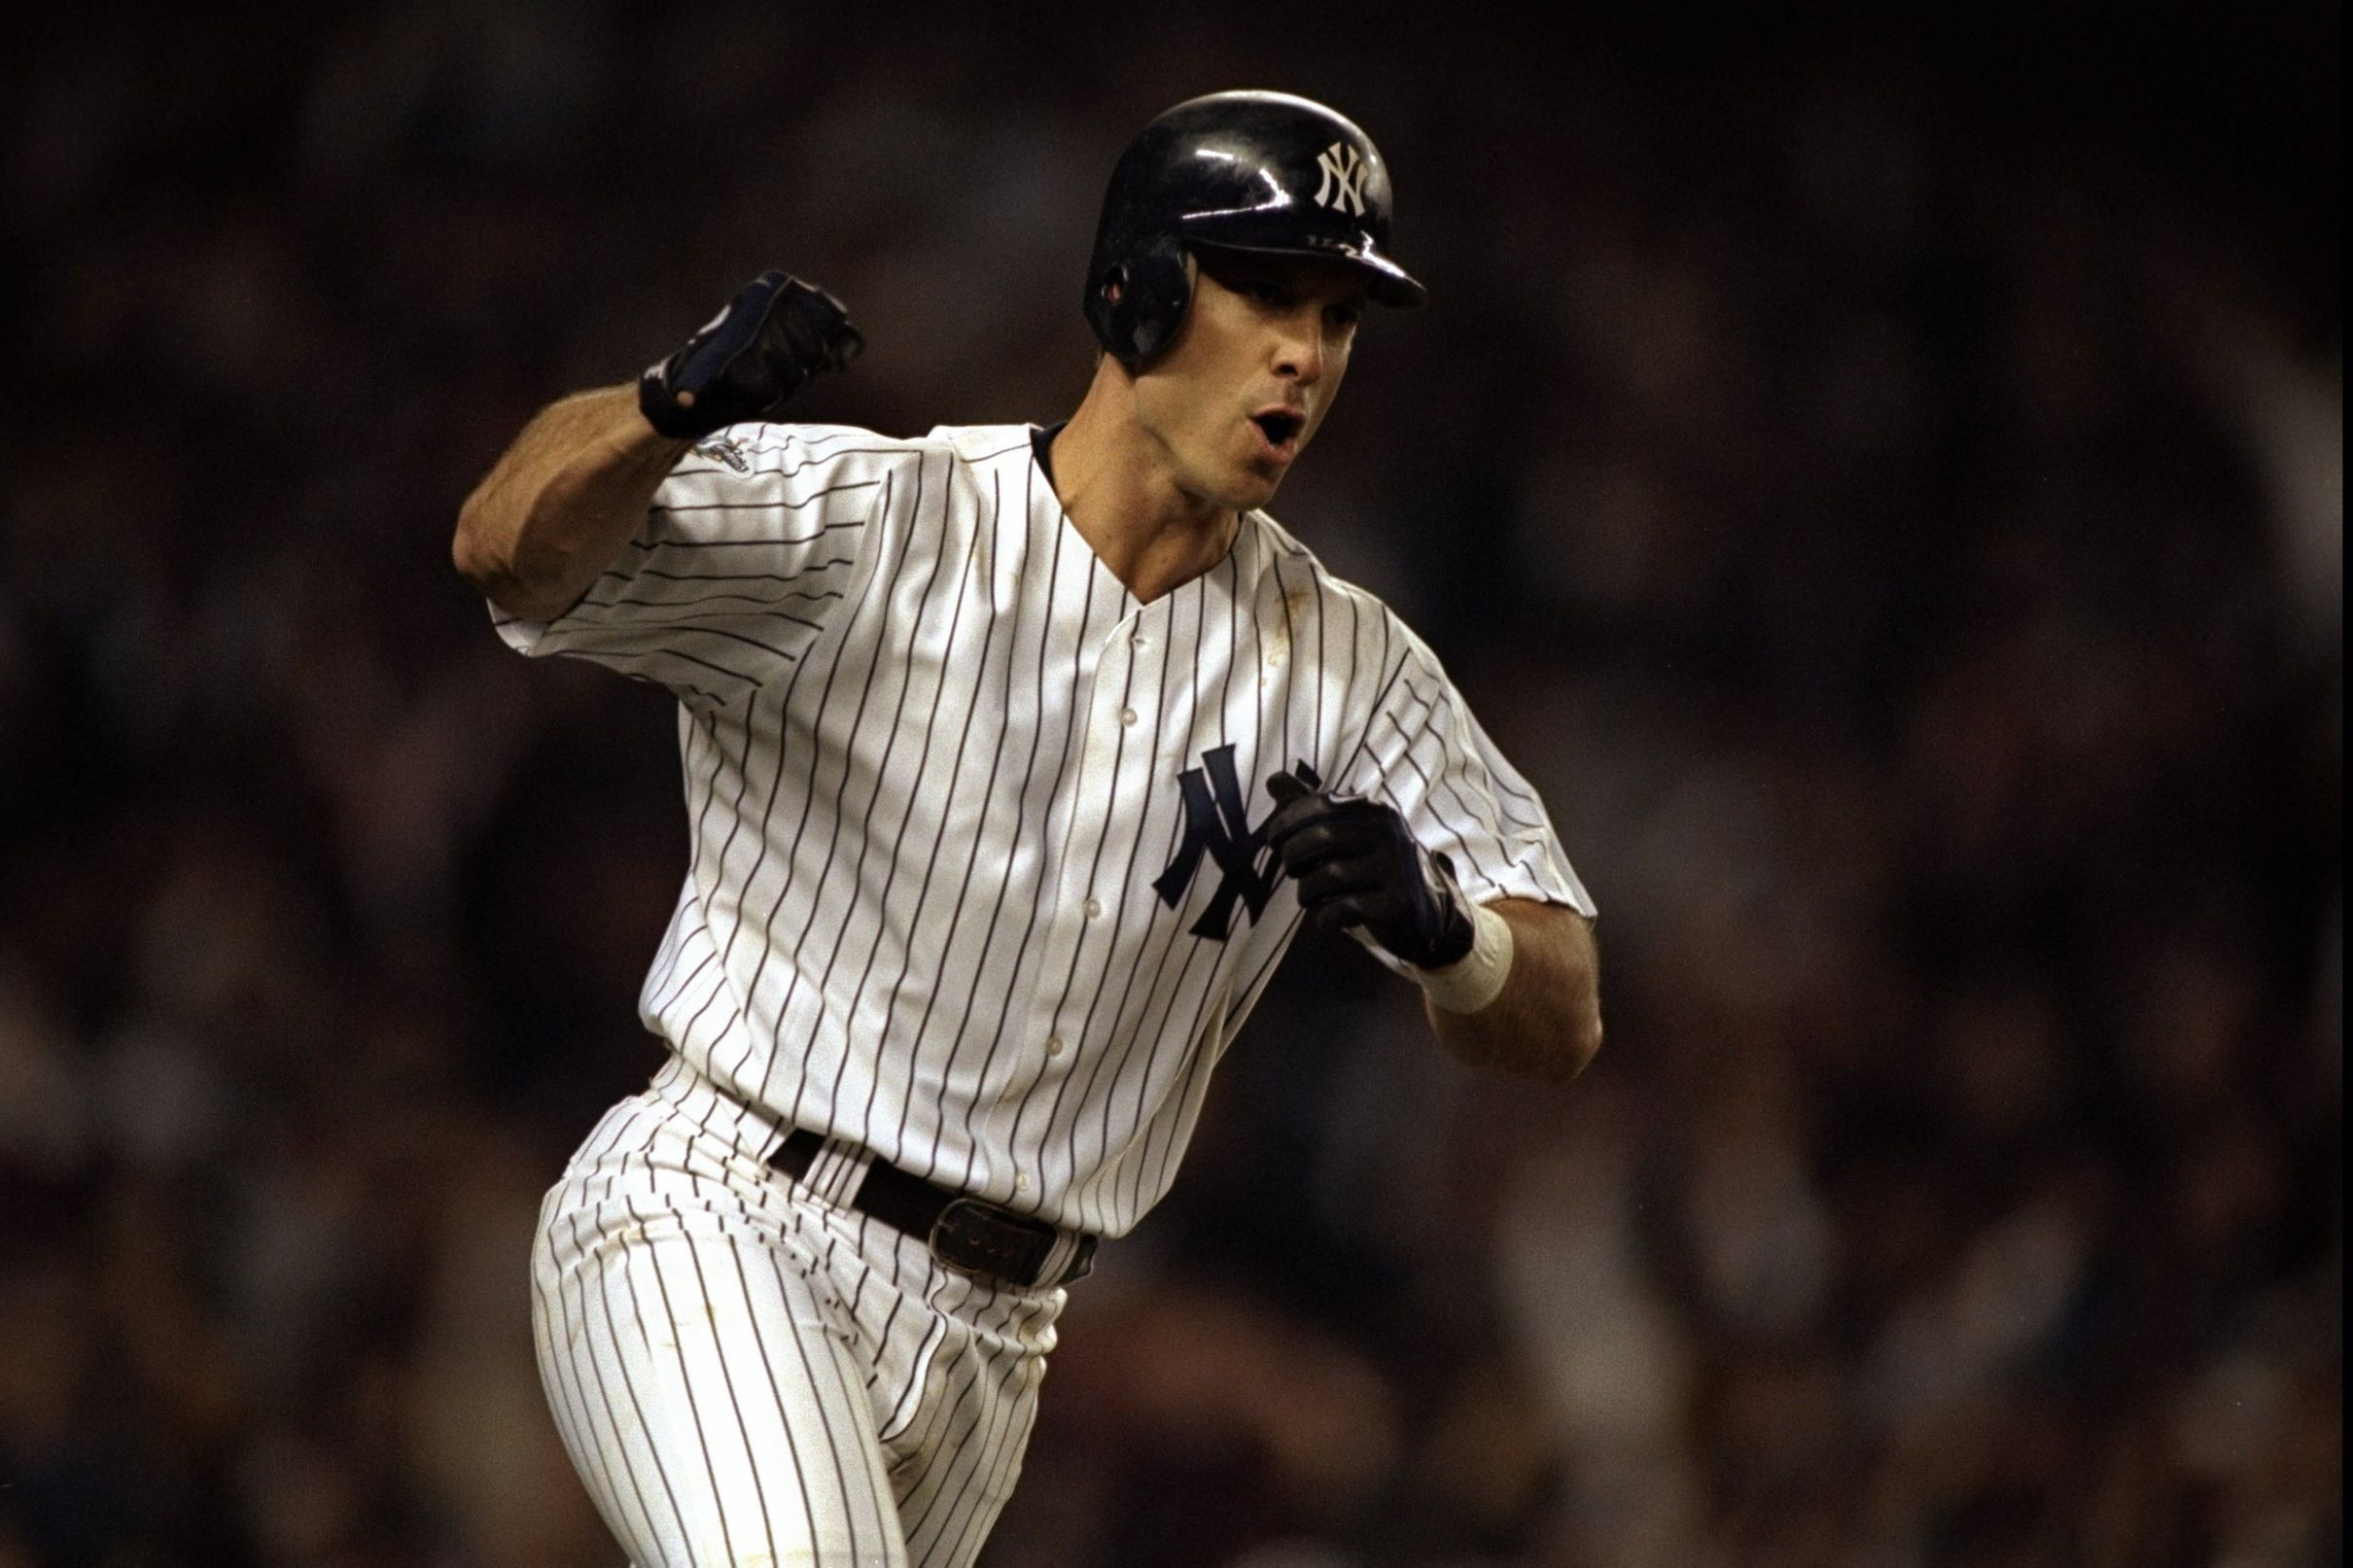 1998 Yankees Diary, October 21: The top of the mountain